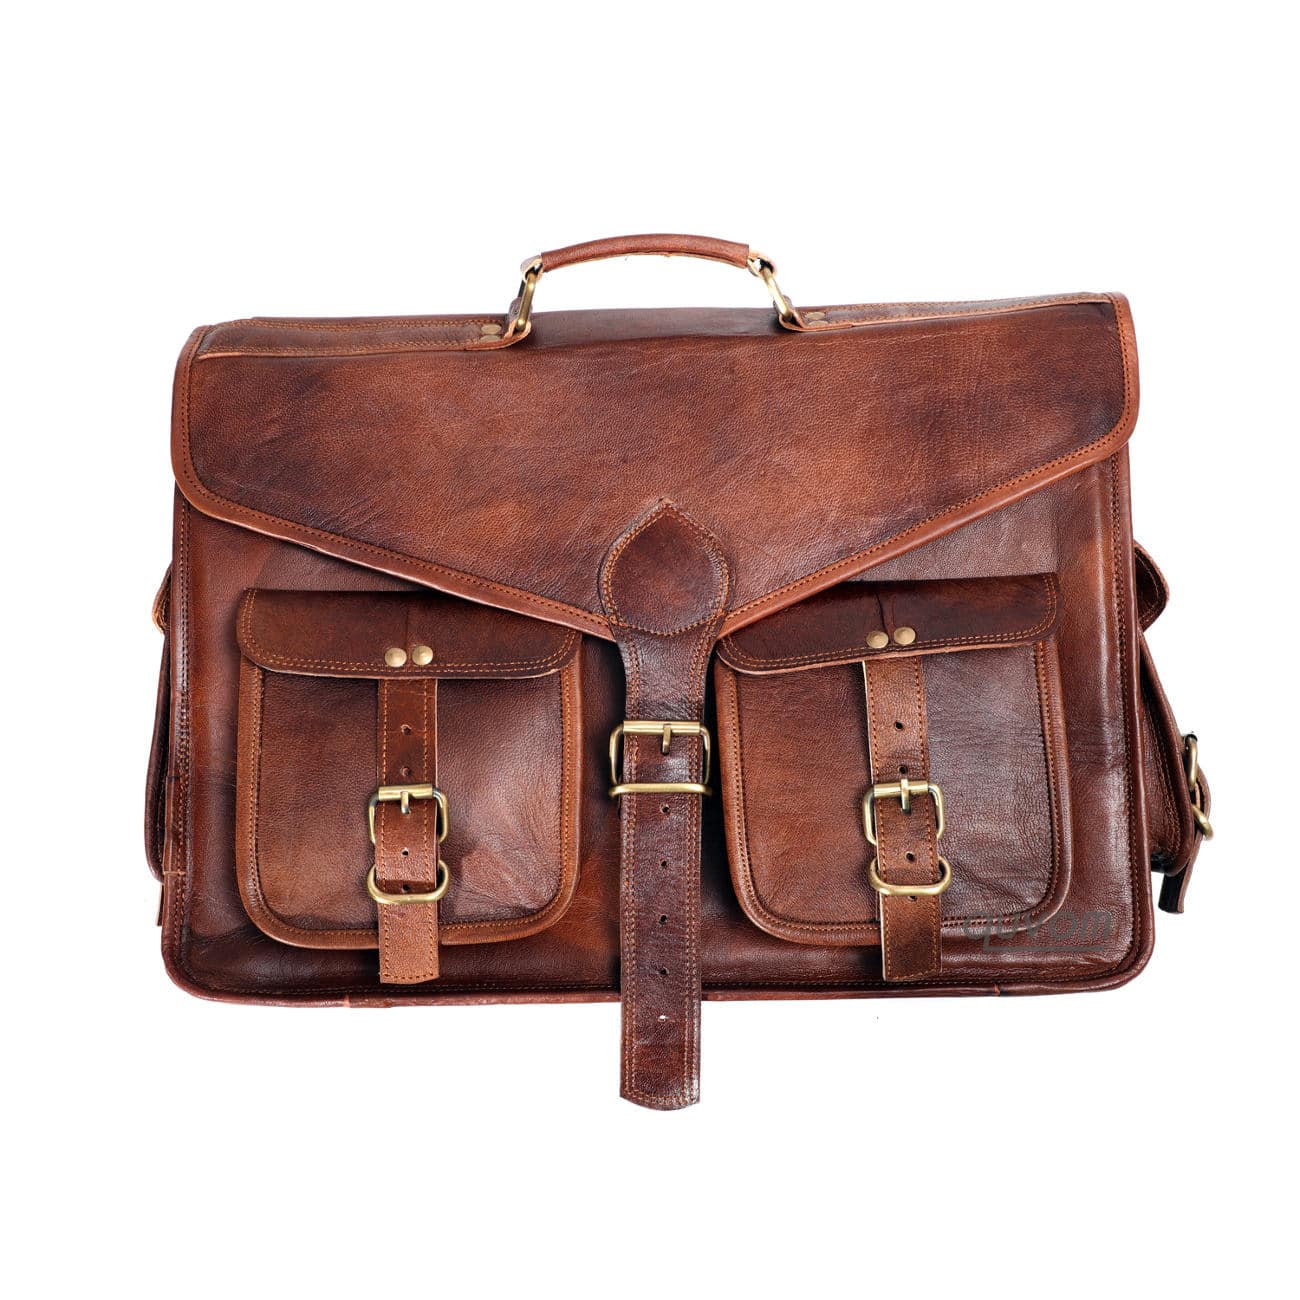 Top Rated Brown Leather Messenger Briefcase Bag | Quvom.com